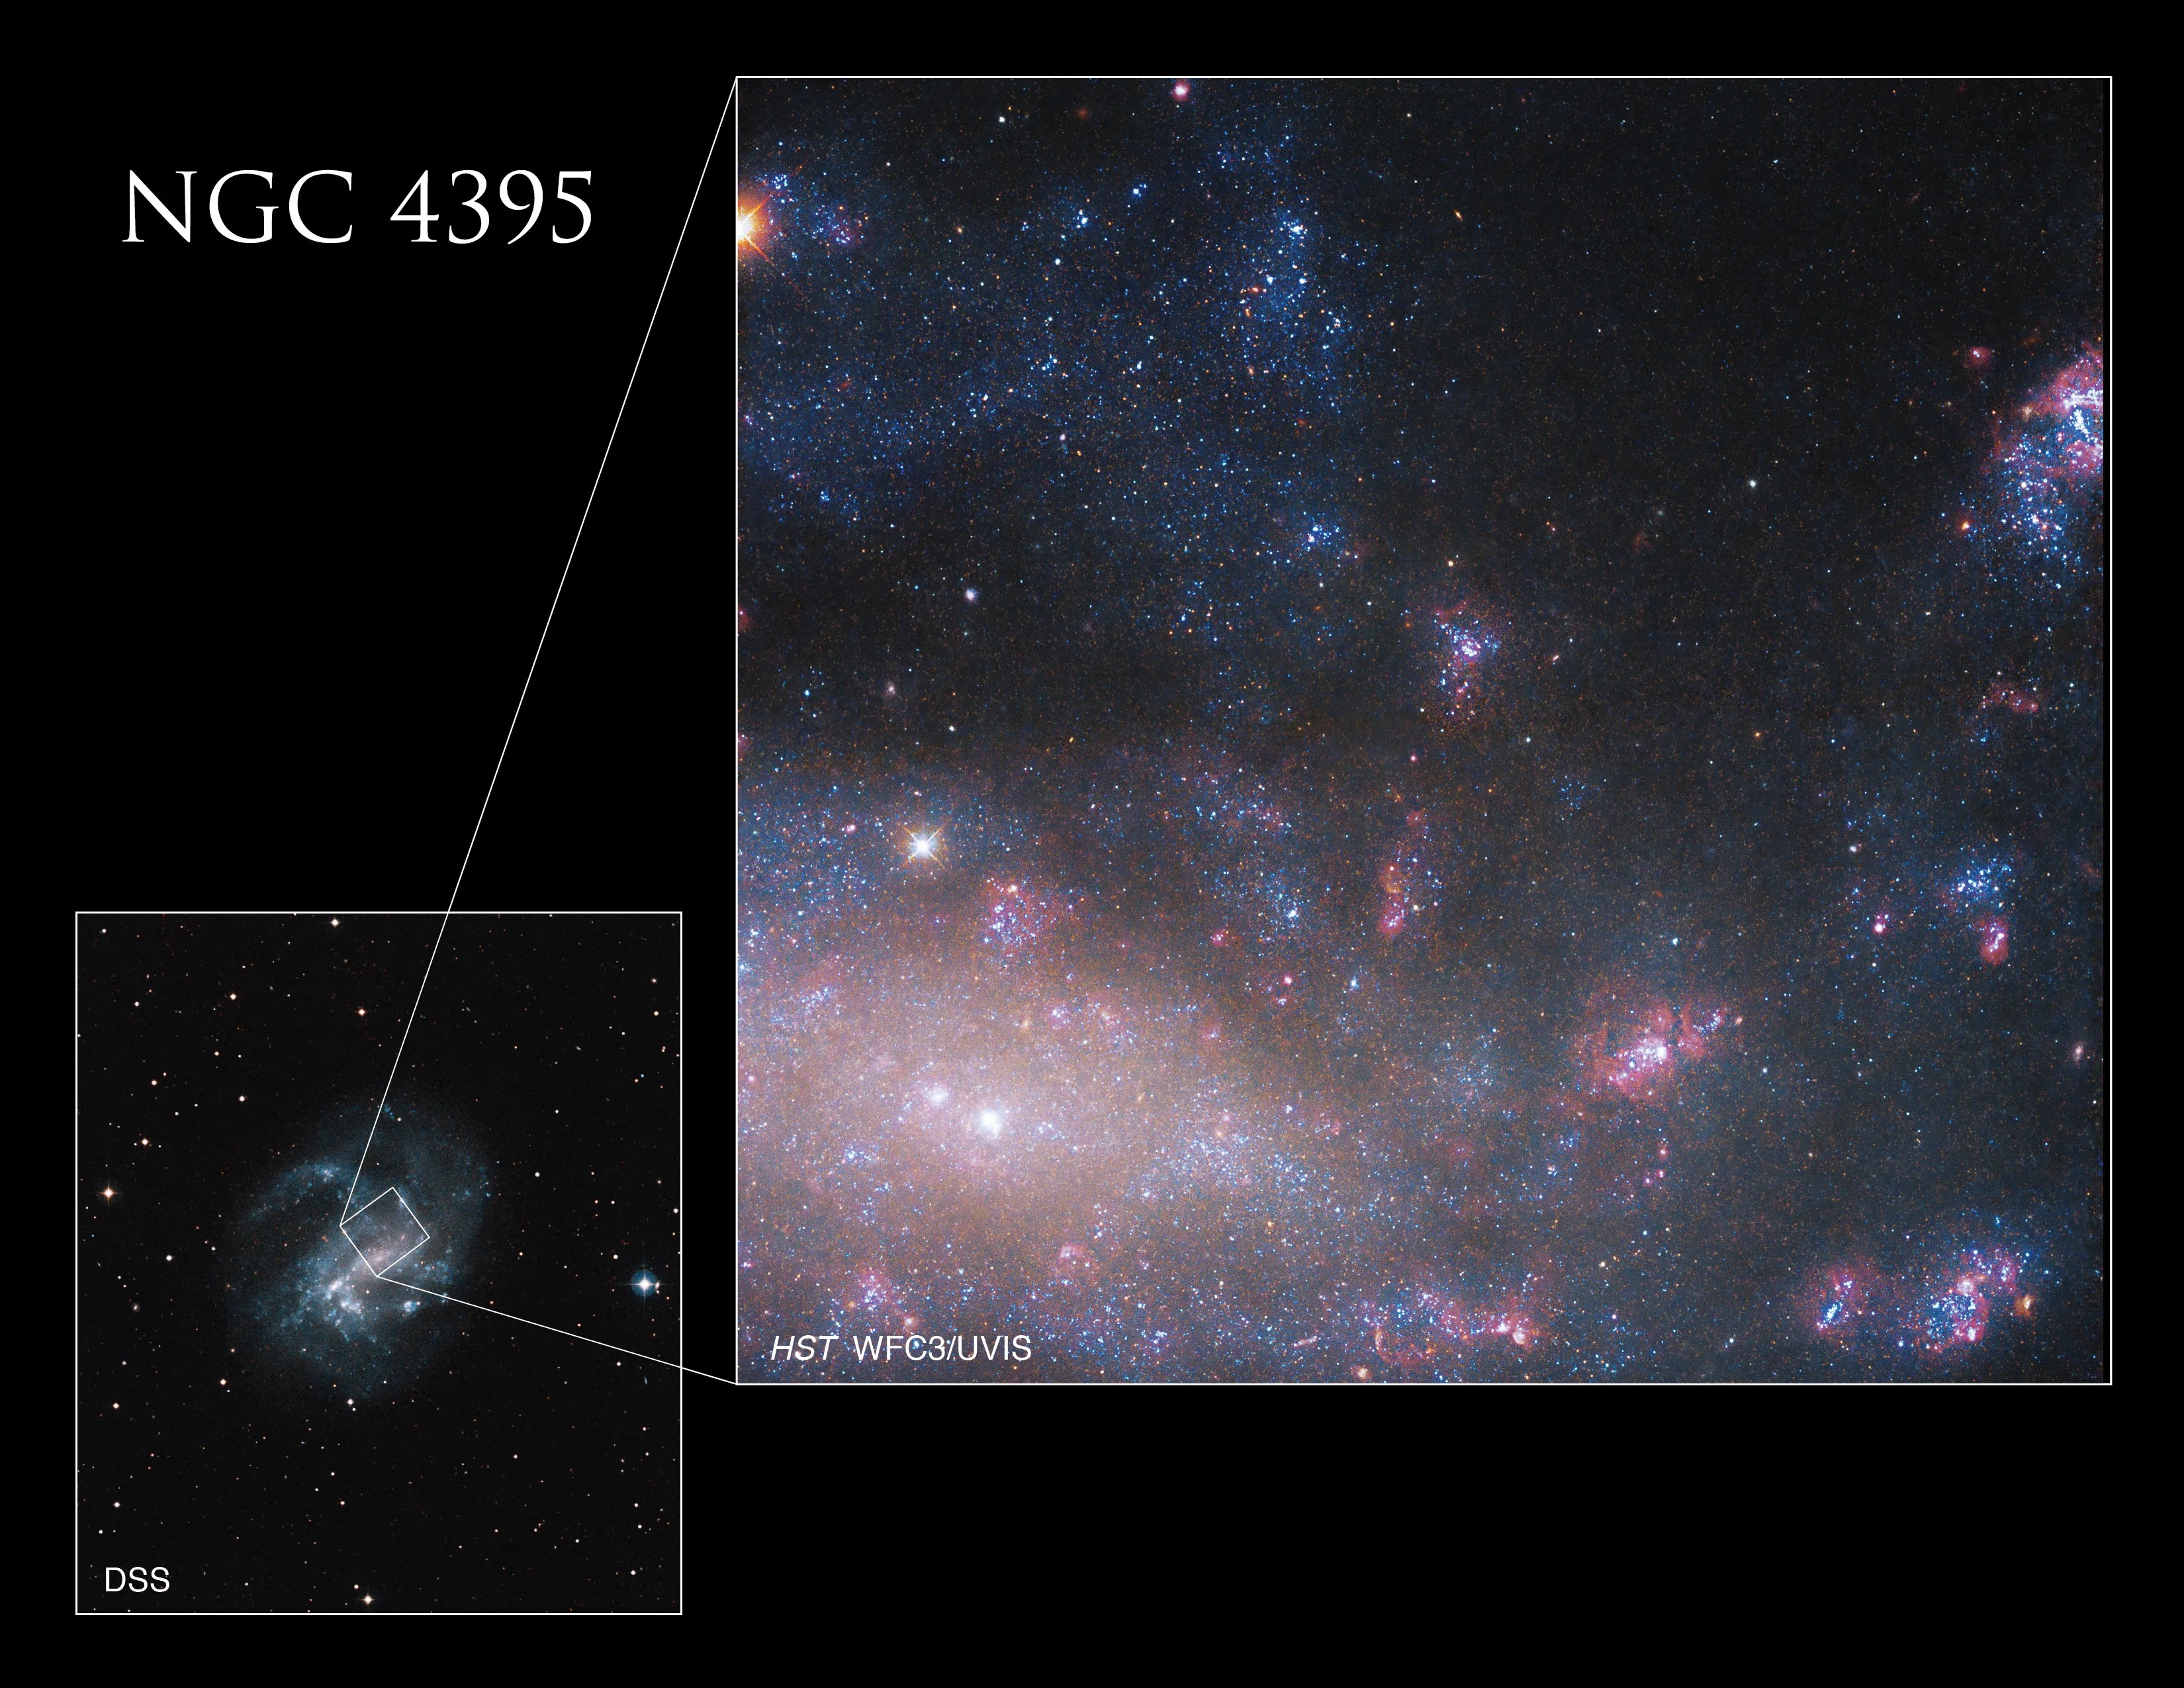 Bright white, pink, and blue stars and gas, concentrated in the lower left of the frame. Black background. Lower Left: small image of NGC 4395 that shows the location of larger Hubble image.